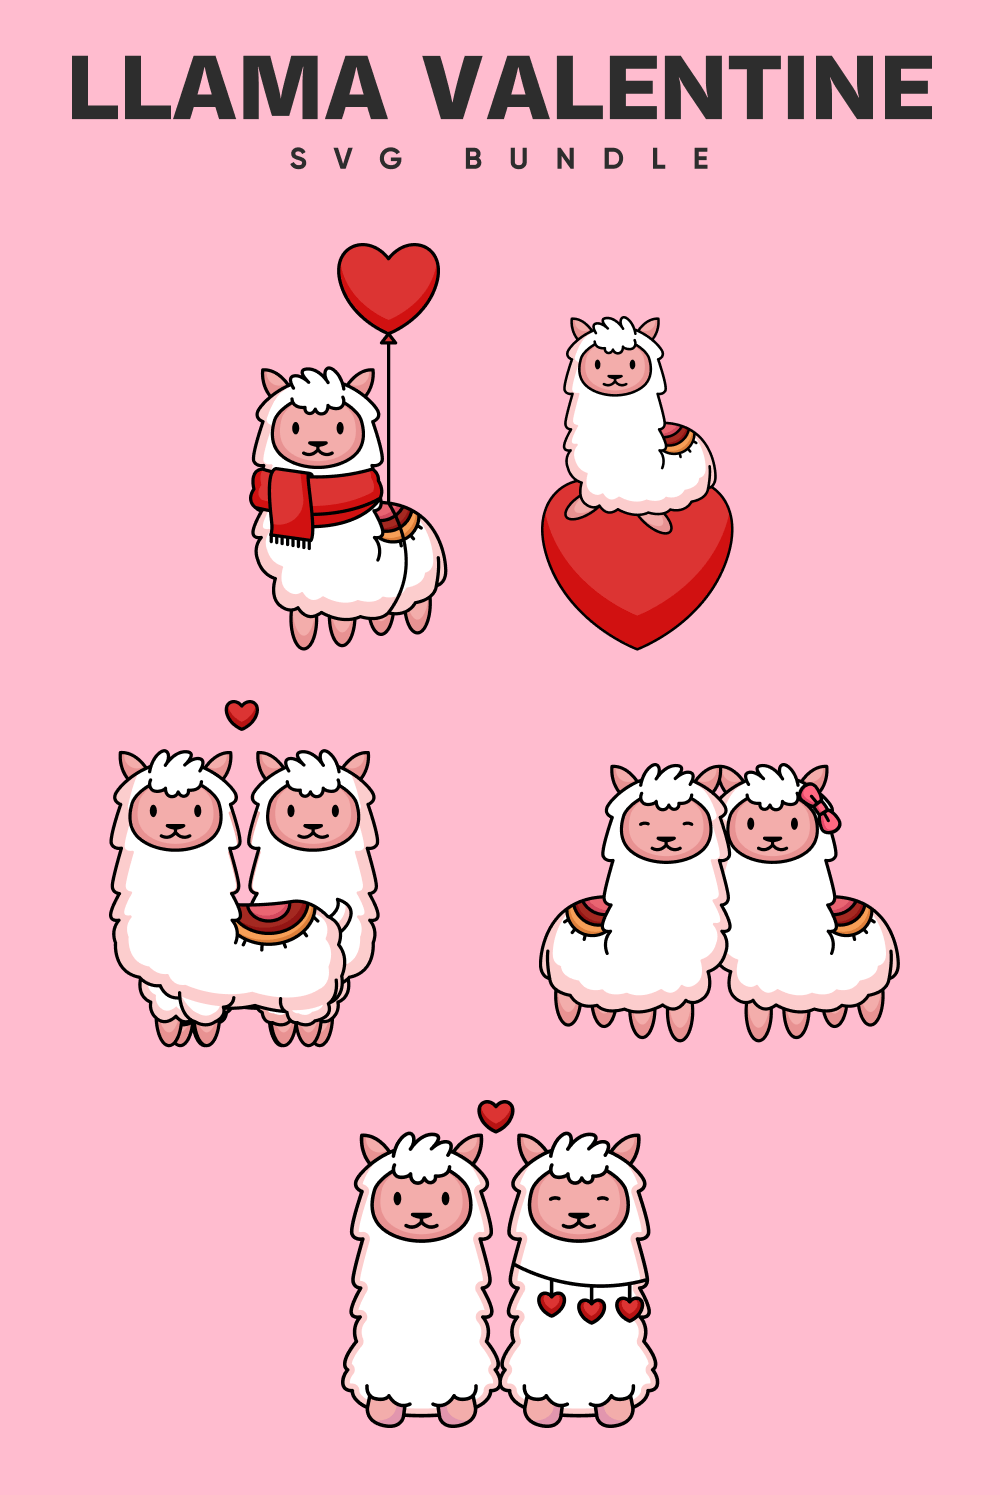 Bunch of llamas with a heart on a pink background.